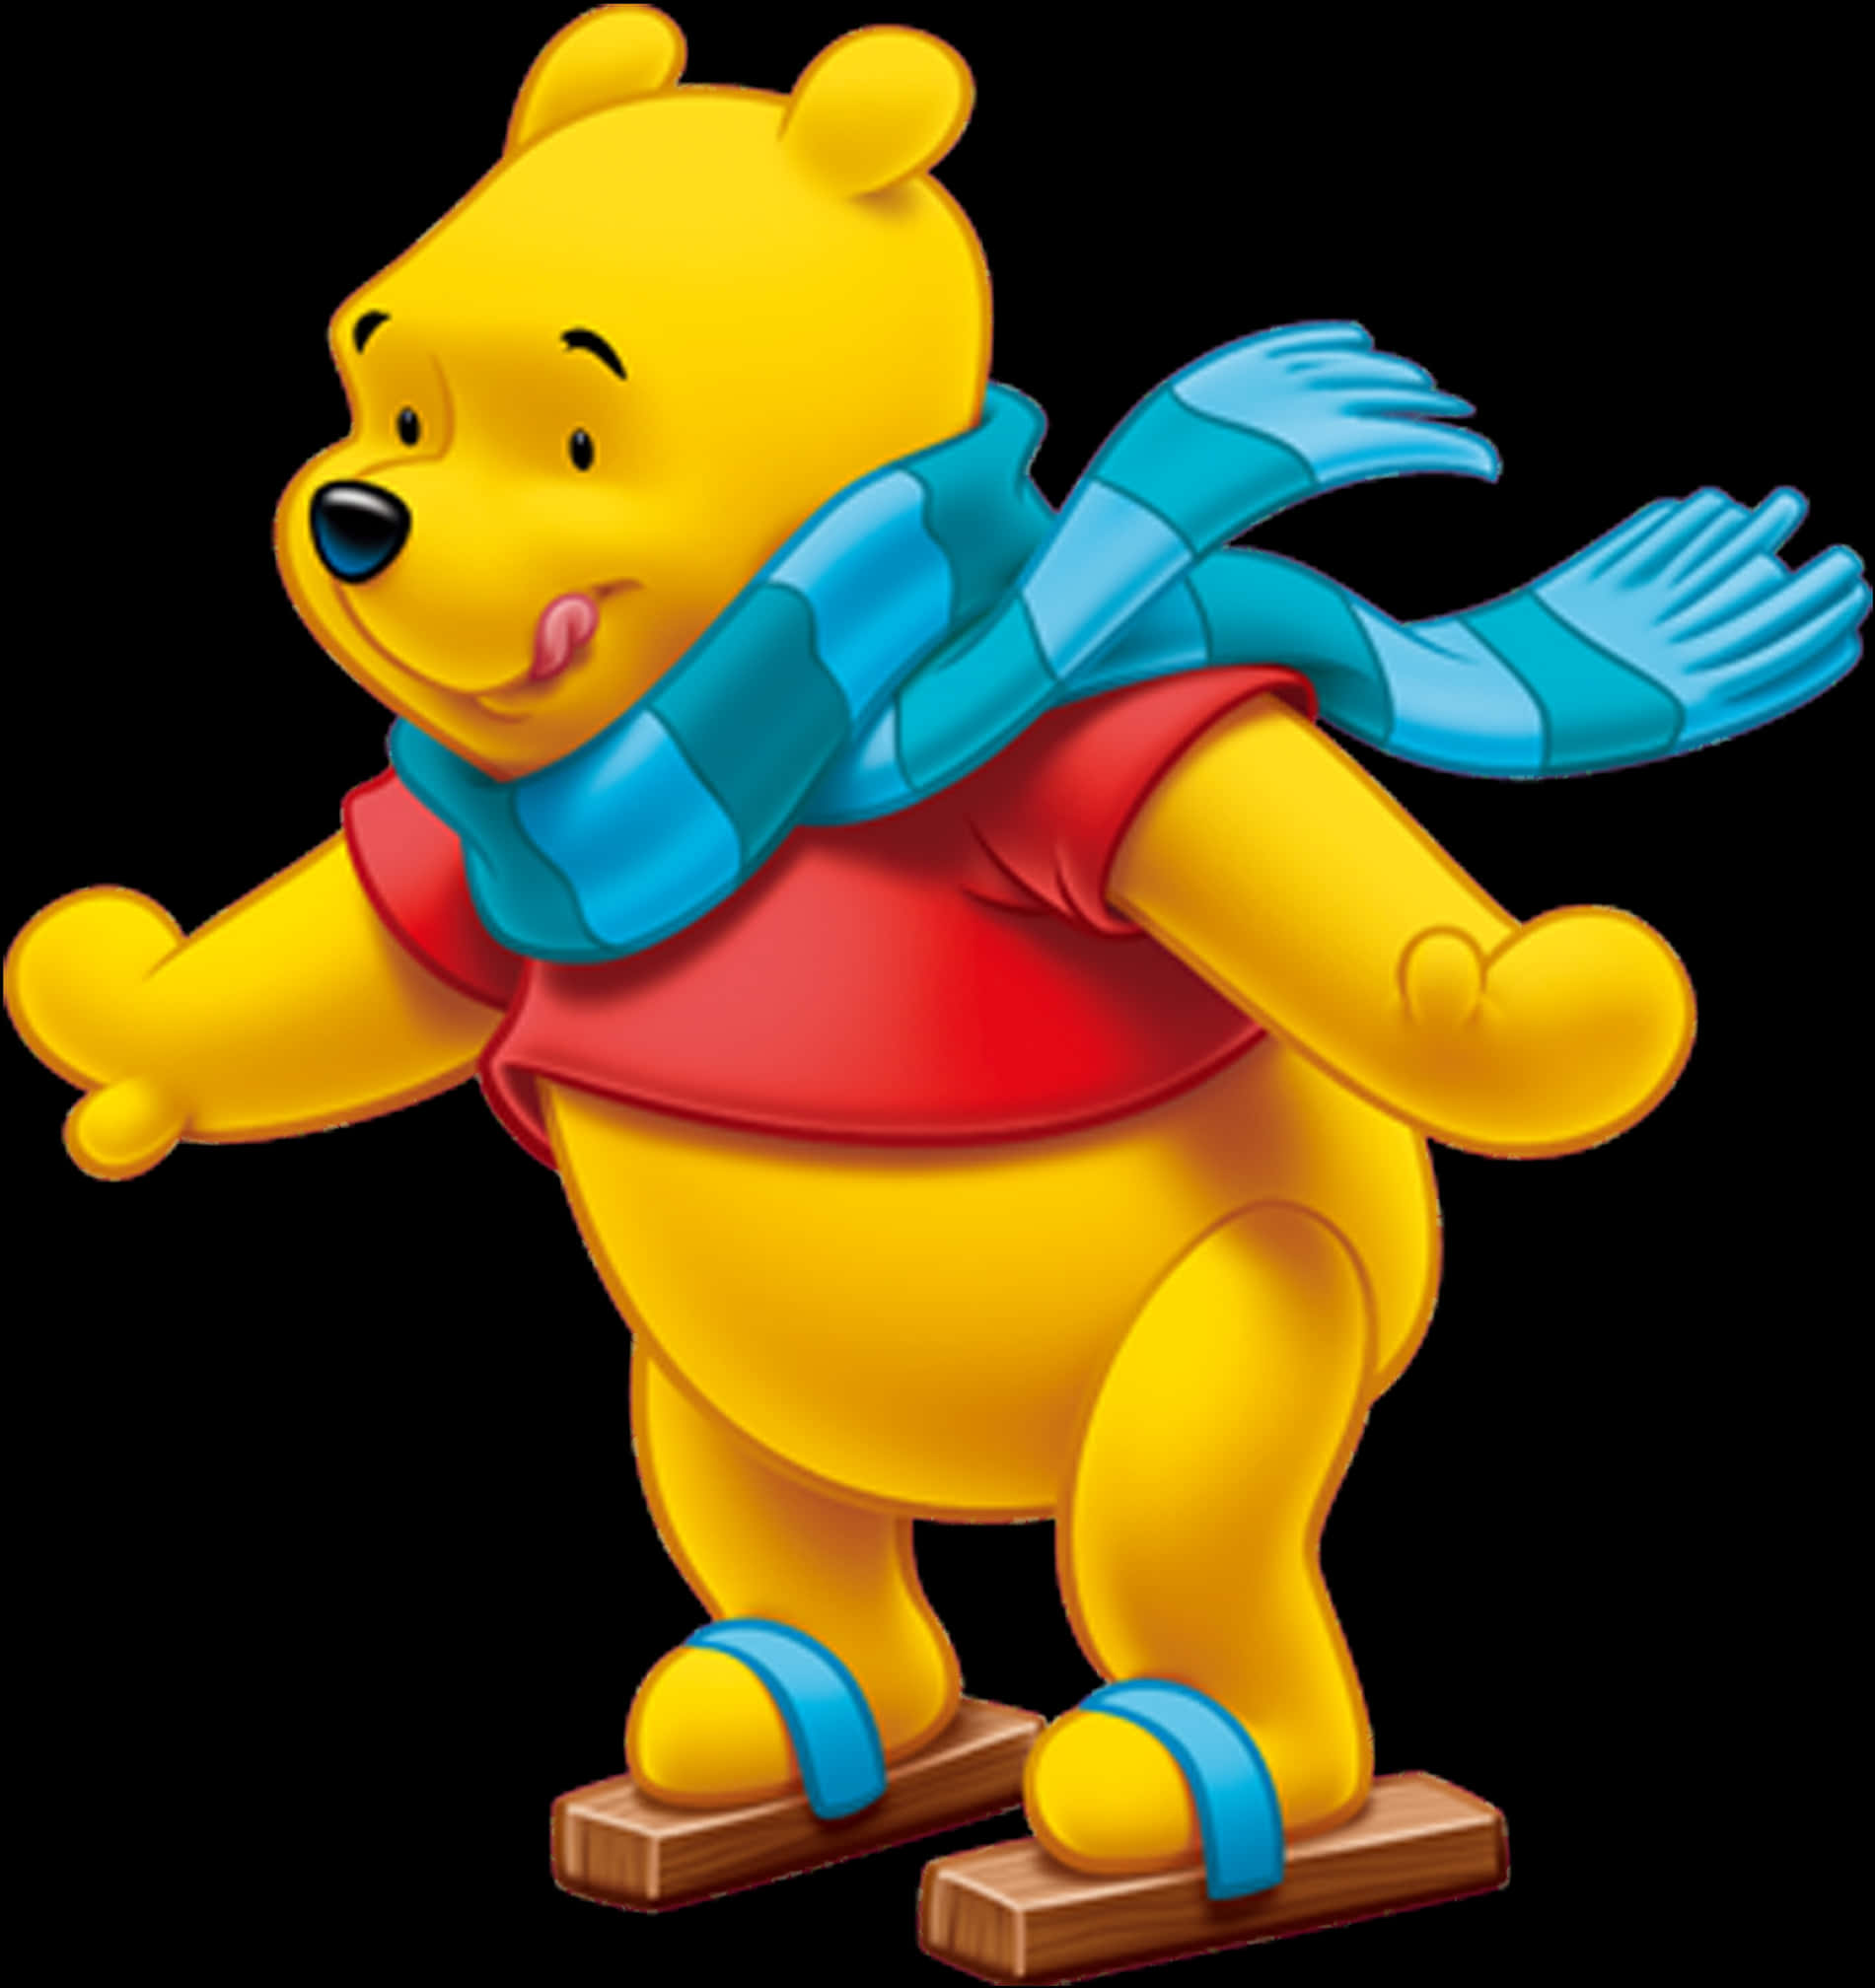 Cartoon Character Of A Cartoon Bear Wearing A Scarf And Sandals